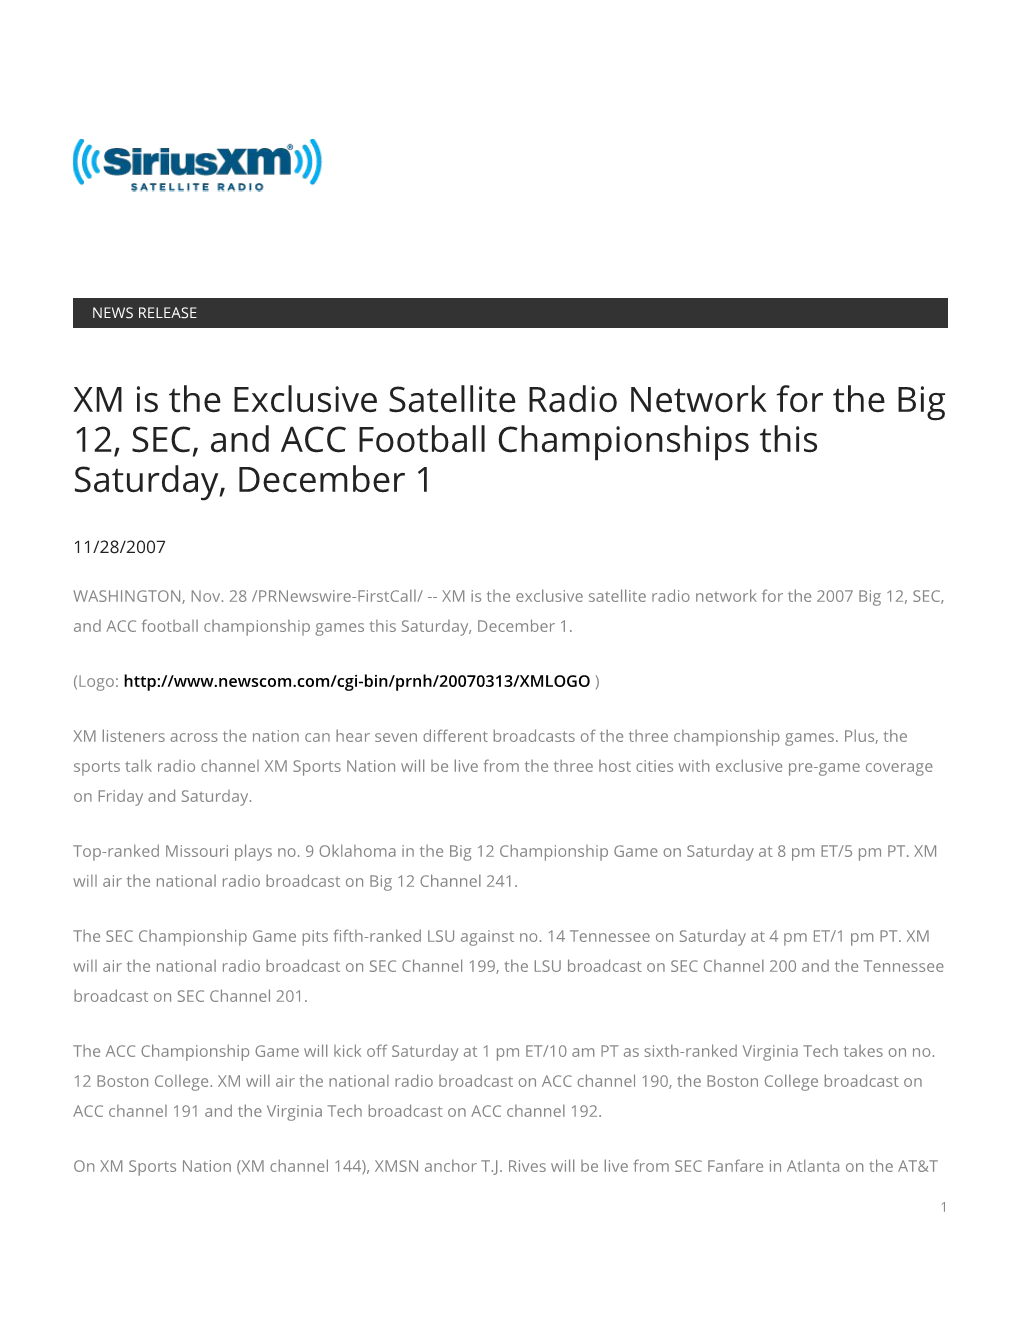 XM Is the Exclusive Satellite Radio Network for the Big 12, SEC, and ACC Football Championships This Saturday, December 1